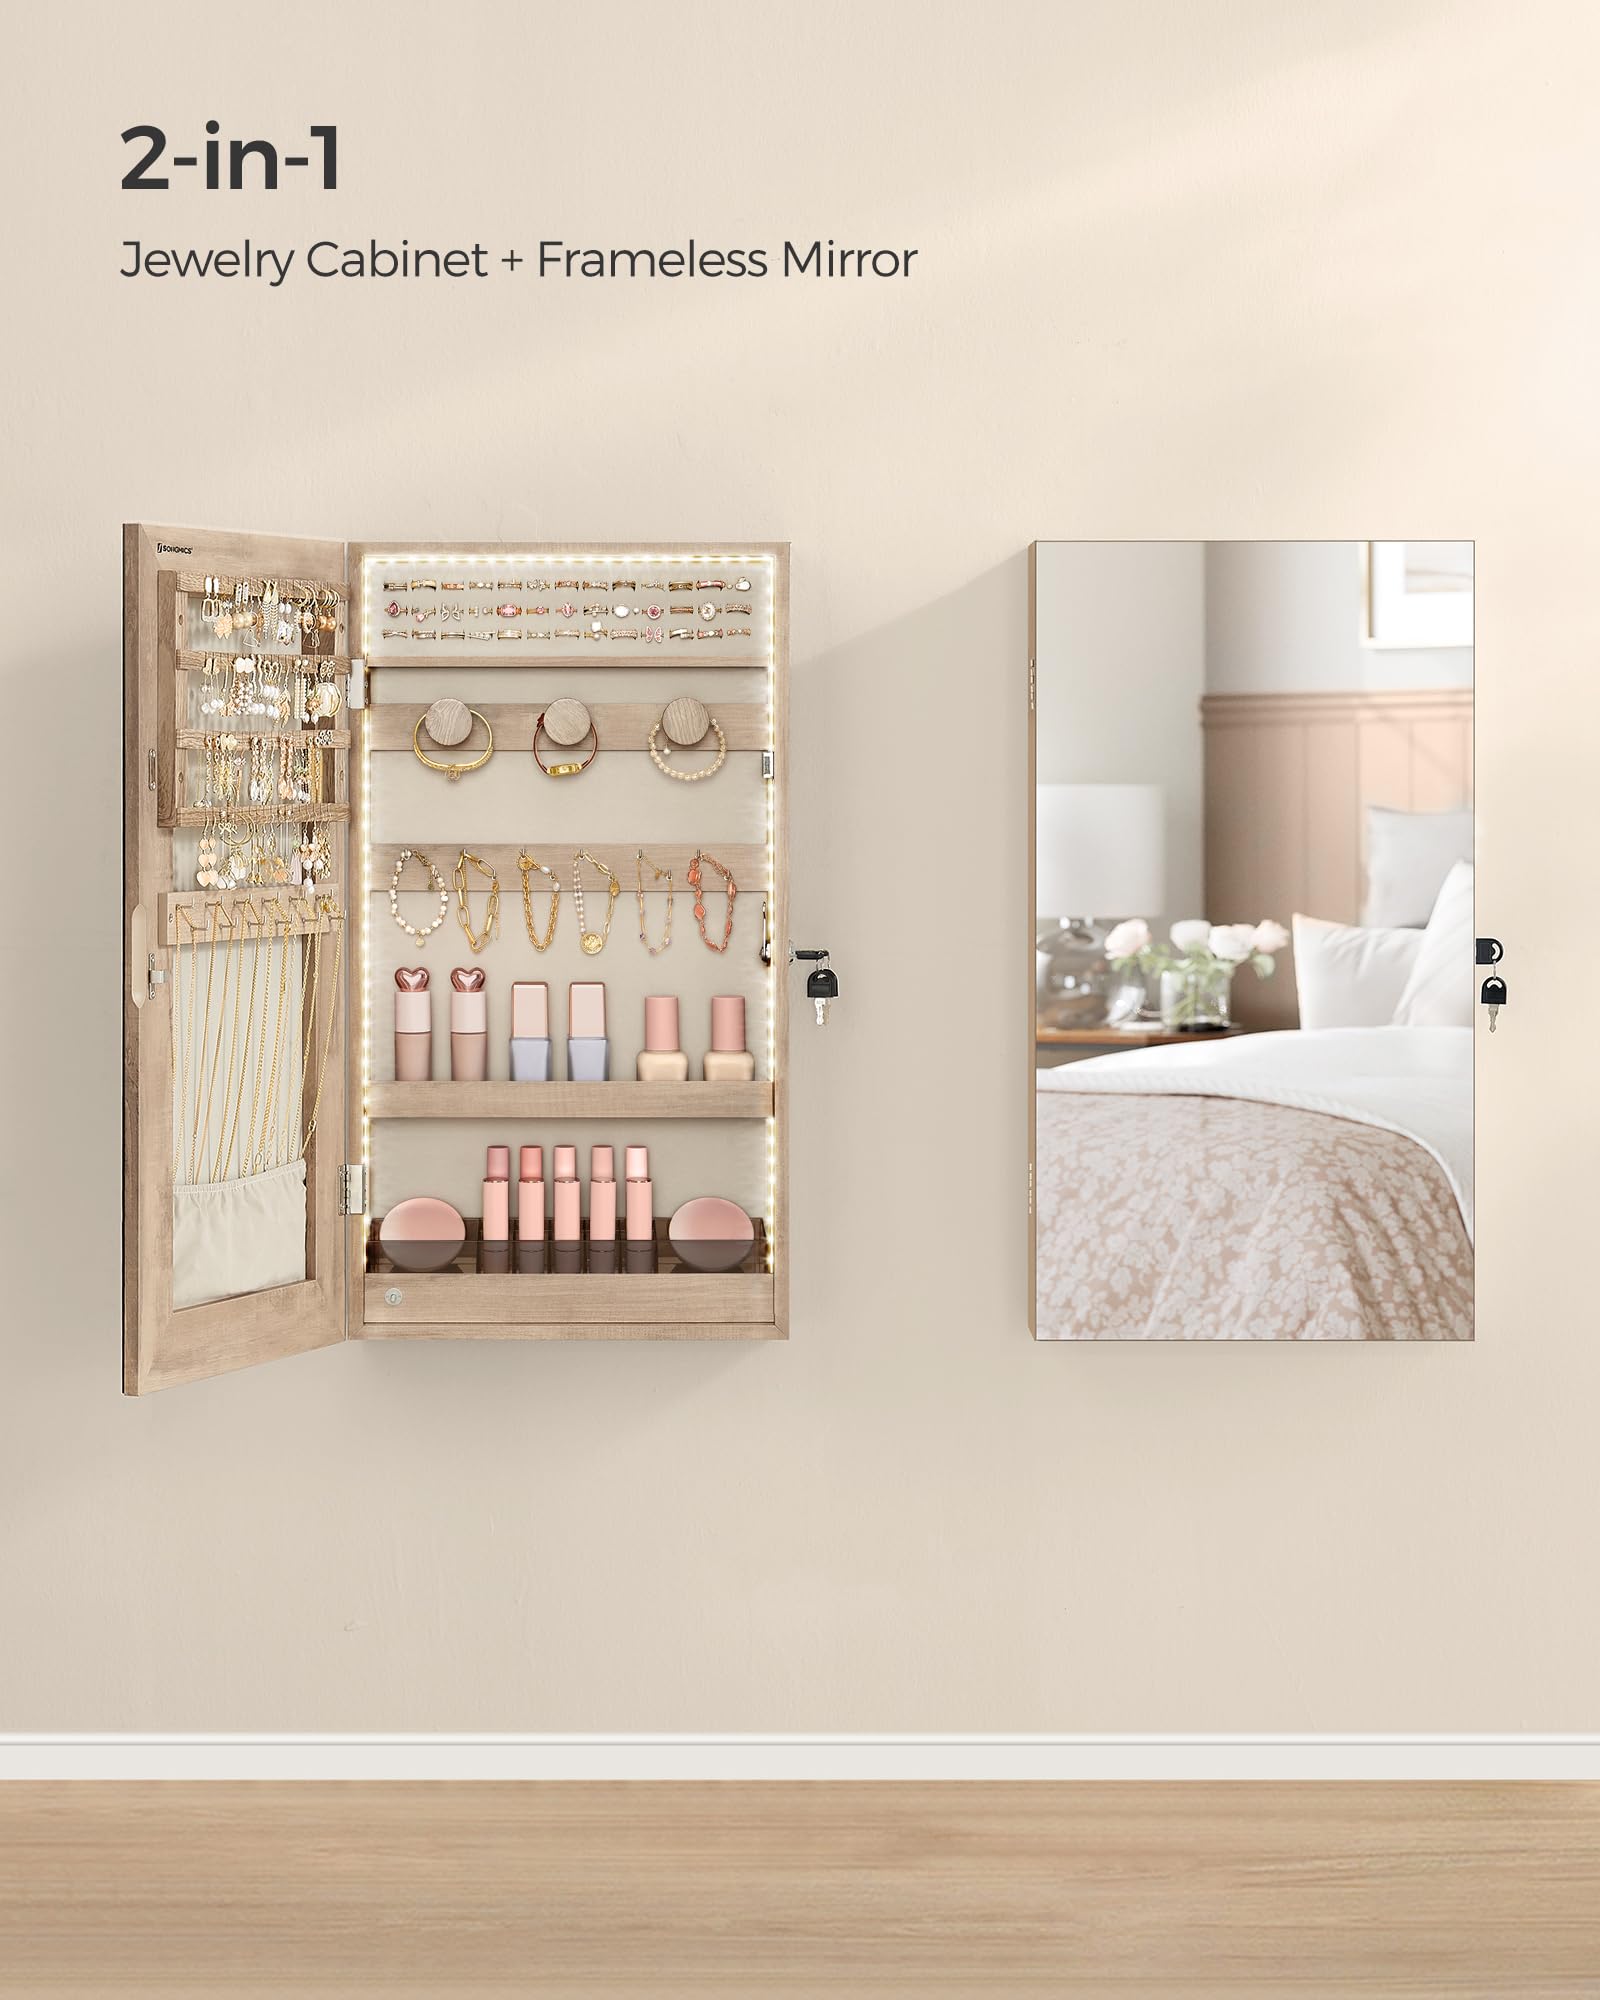 SONGMICS Mirror Jewelry Cabinet Armoire with Built-in LED Lights, Wall or Door Mounted Jewelry Storage Organizer, 3.8 x 14.6 x 26.4 Inches Hanging Mirror Cabinet, Gift Idea, Camel Brown UJJC050N01